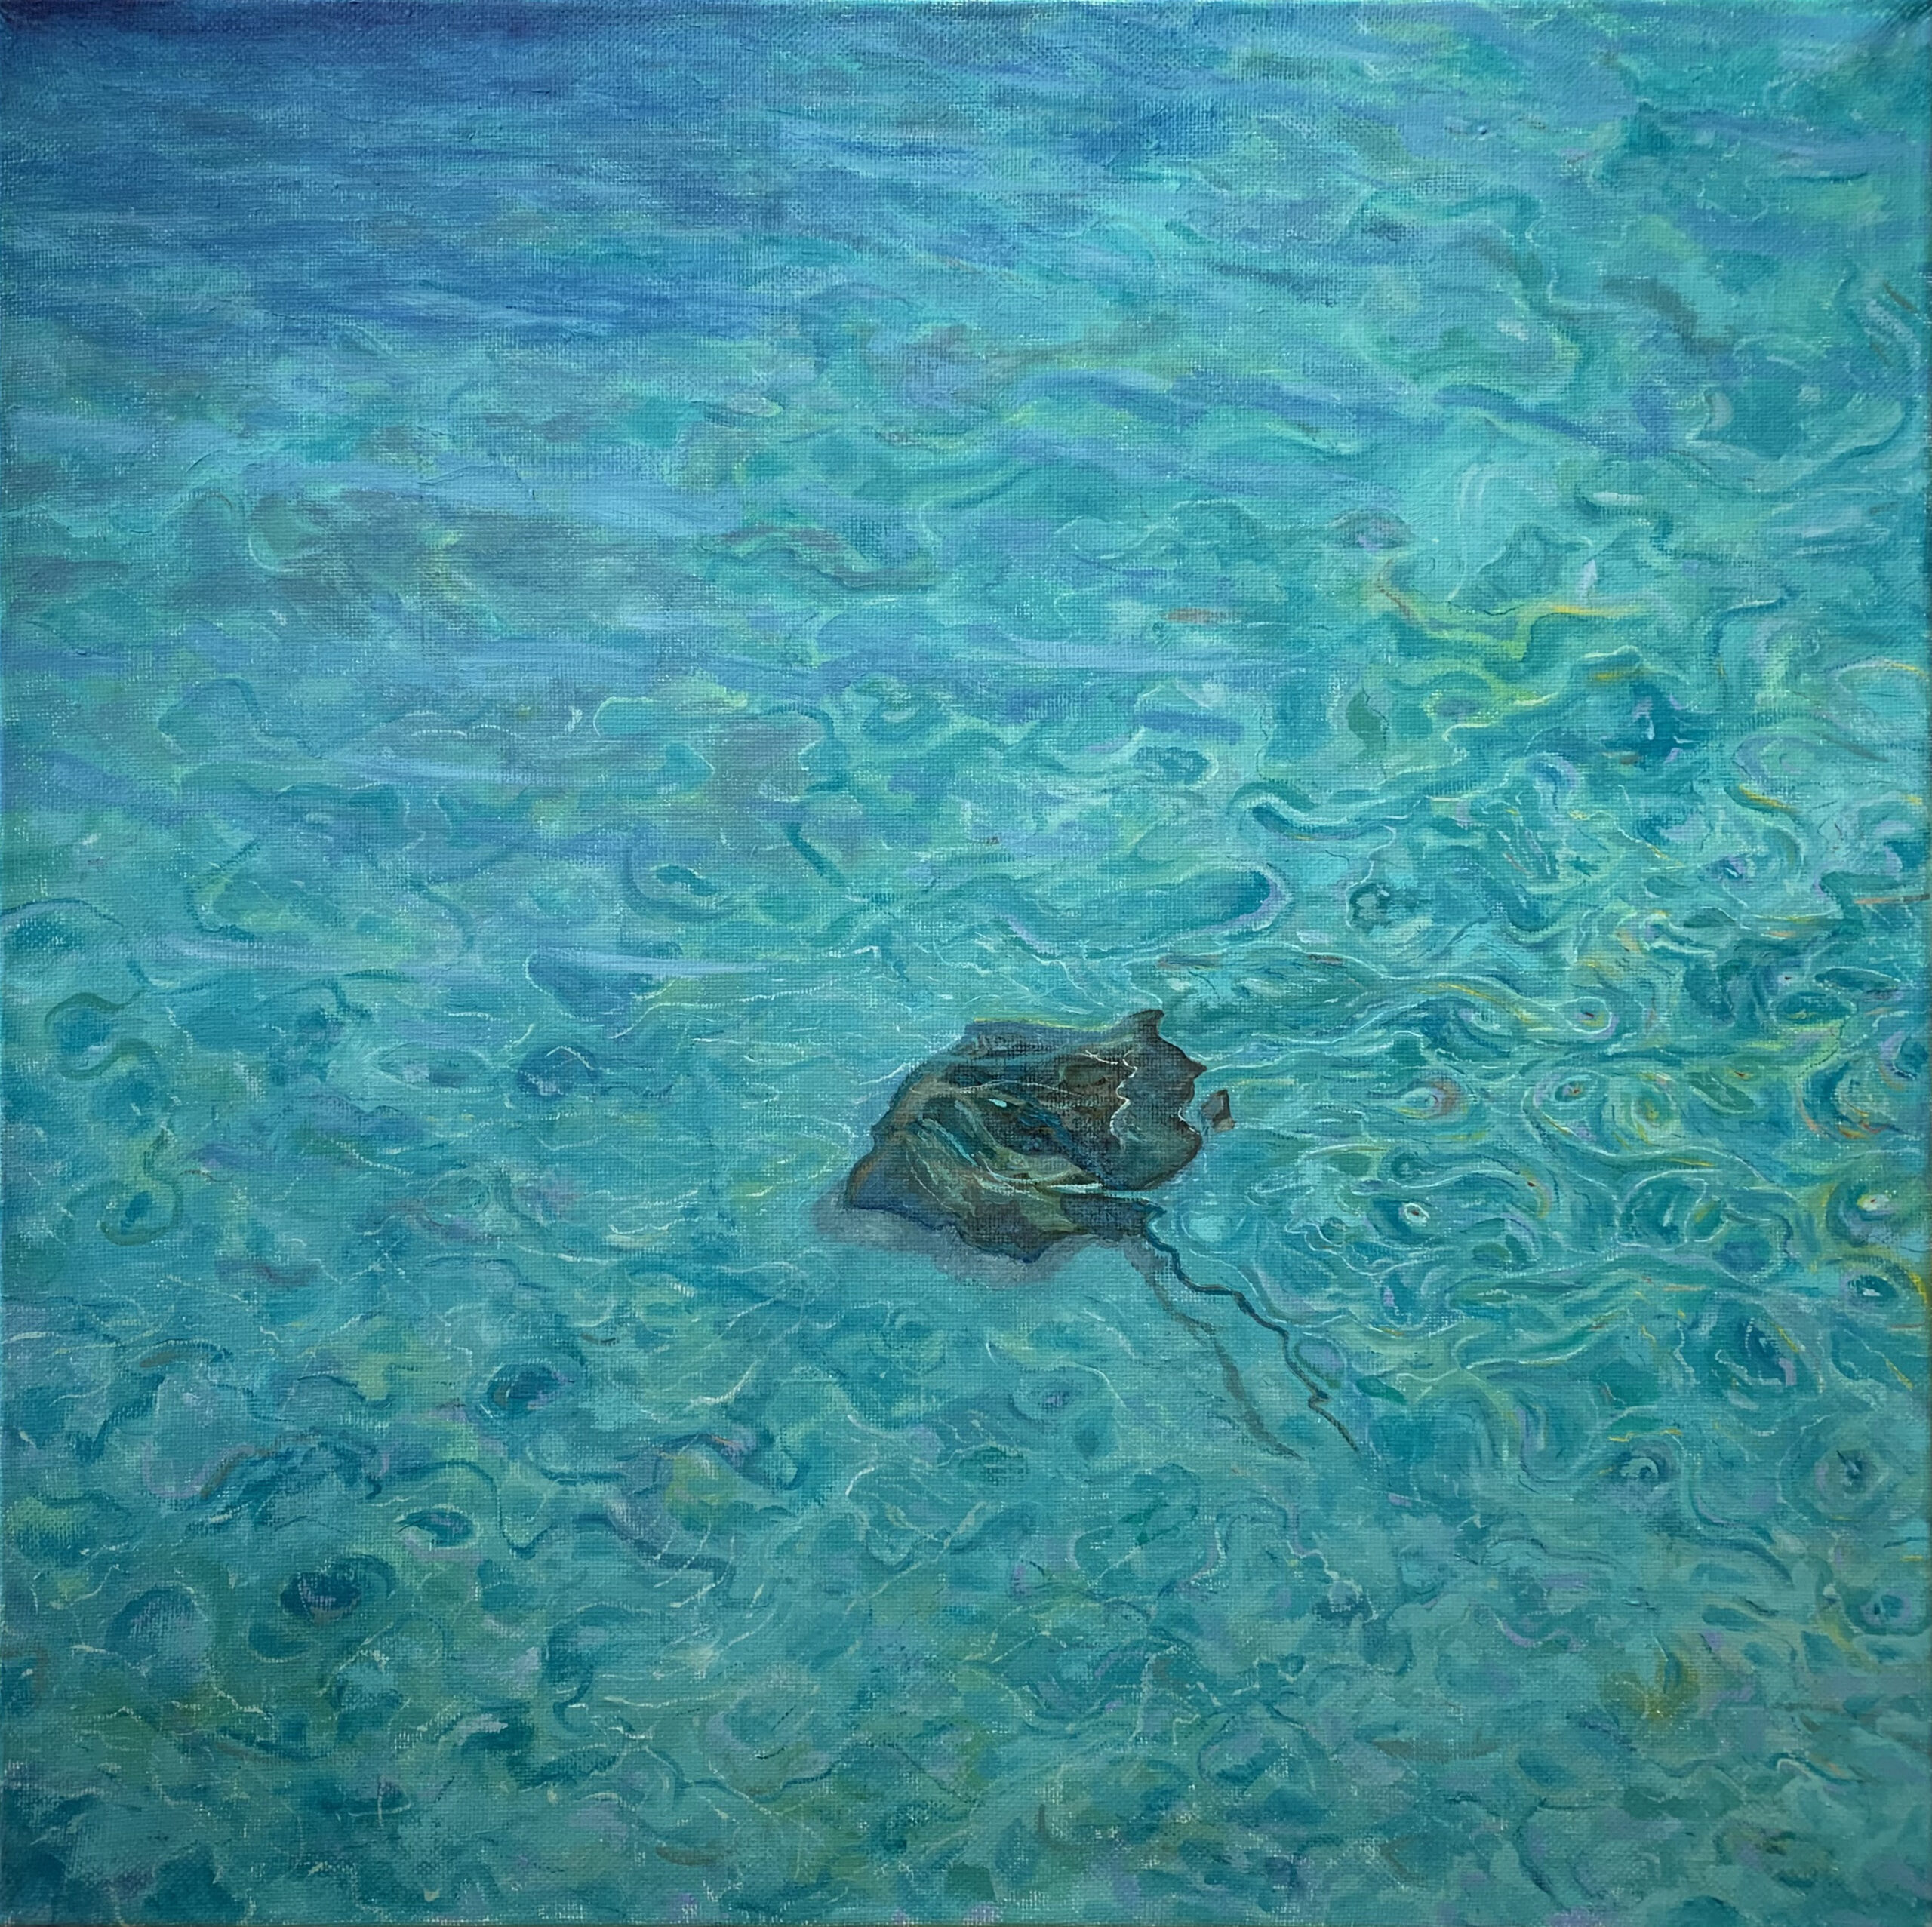 On the Reef (II) - SOLD